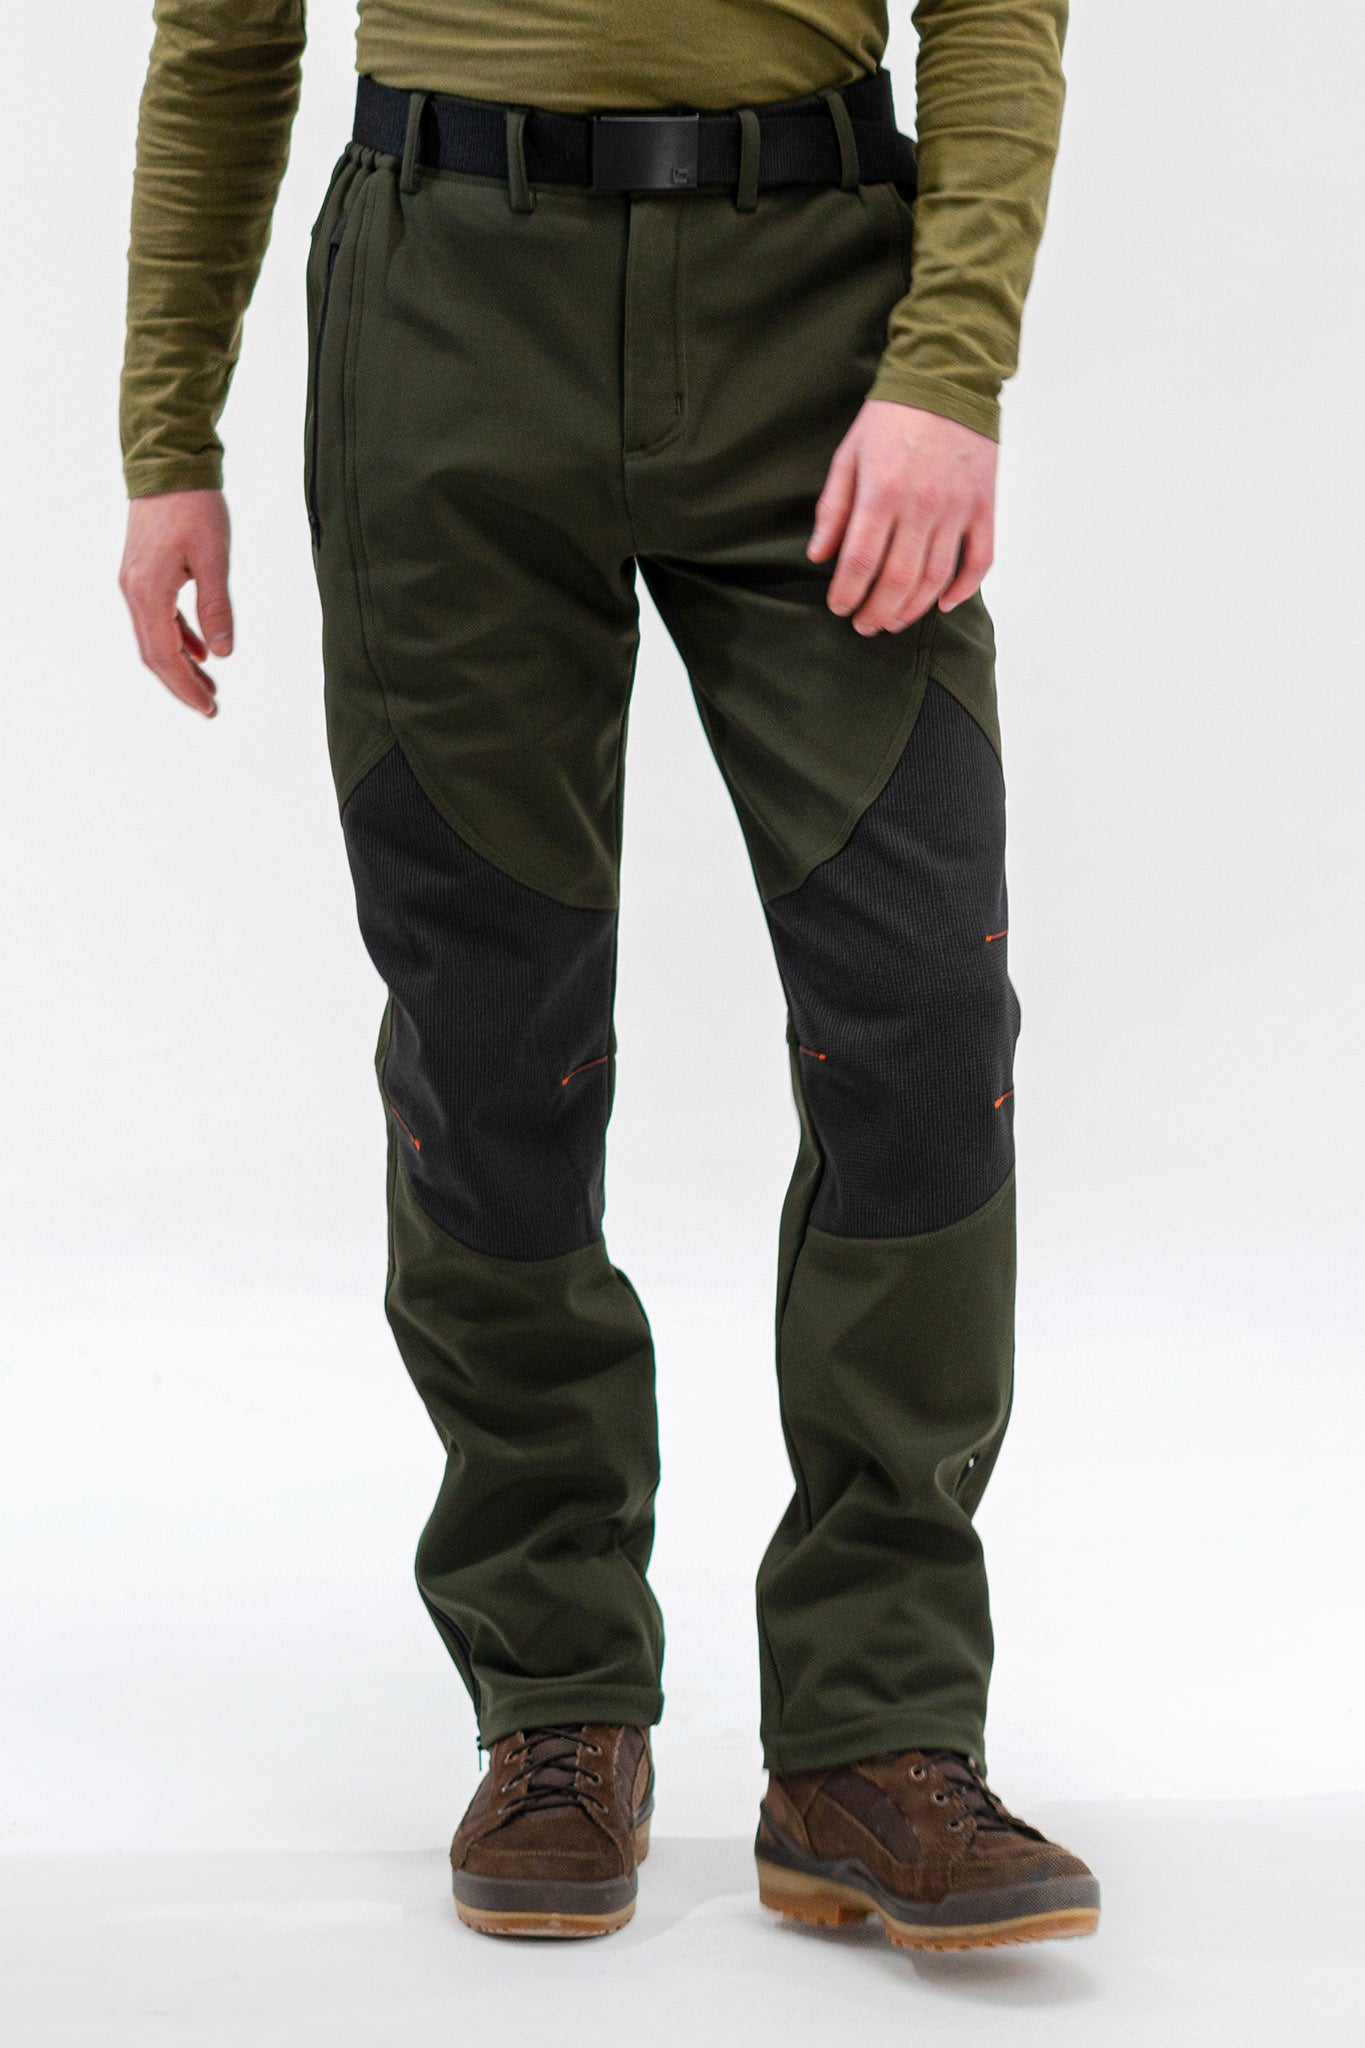 Northbound Gear Adventure Water Resistant Pants (ARMY GREEN)